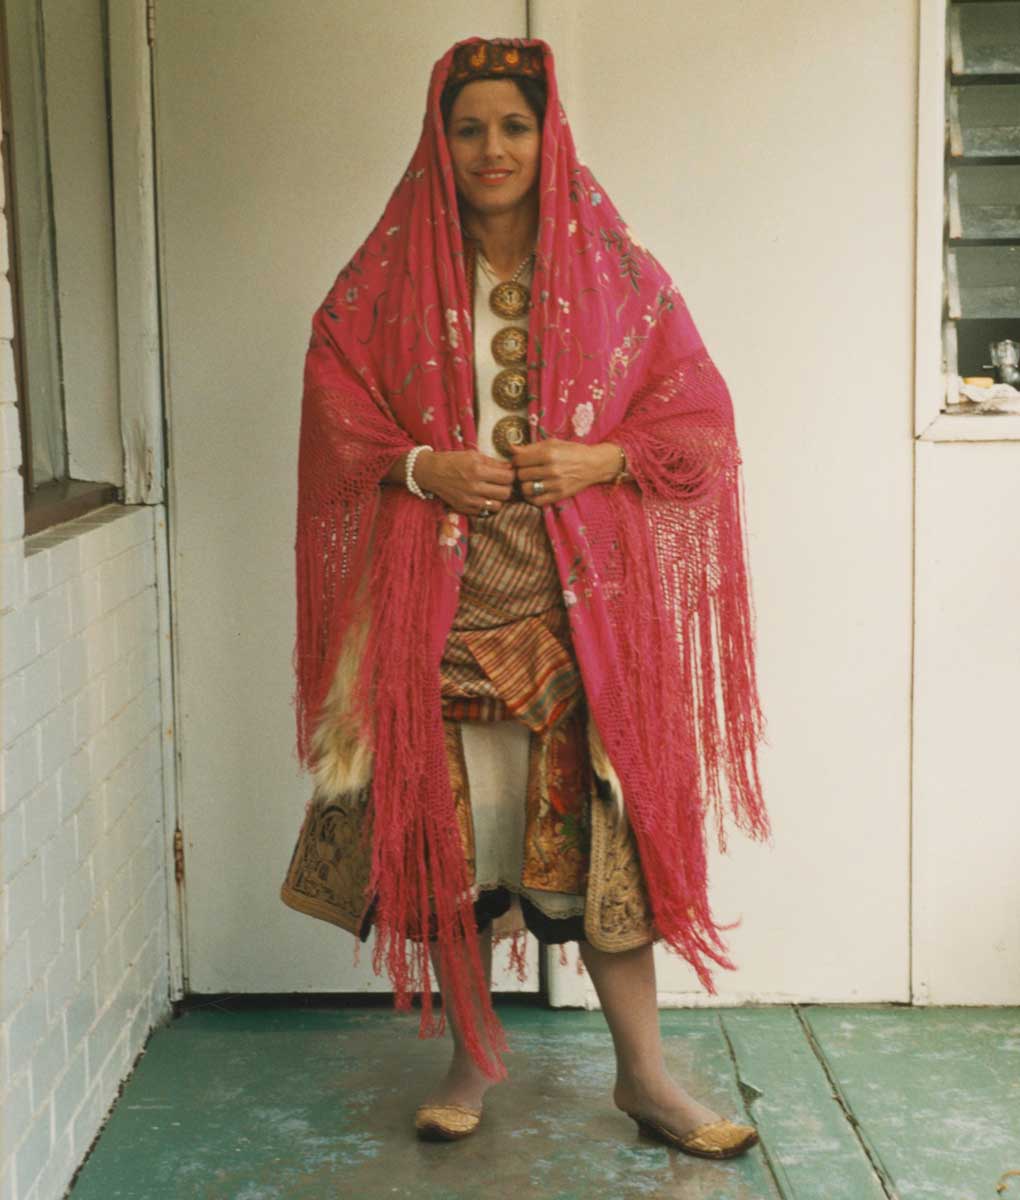 Portrait photograph of a woman wearing a traditional Greek garment with many layers. She wears a knee-length off-white chemise over a pair of knee-length pantaloons. Over the chemise is a crimson knee-length tunic embellished with gold thread and colourful silk embroidered floral motifs.  Wrapped around her waist and hips is a woven sash with fine checked pattern. Worn over the sash and tunic is a dark coloured three-quarter length overcoat with cream-coloured fur trim down the front opening and hems of the sleeves. The woman wears a yellow, red and blue beanie-shaped hat, and a bright pink silk shawl with long fringed edges is draped over her head and shoulders. The woman wears a pair of embroidered gold slippers with a small heel. - click to view larger image